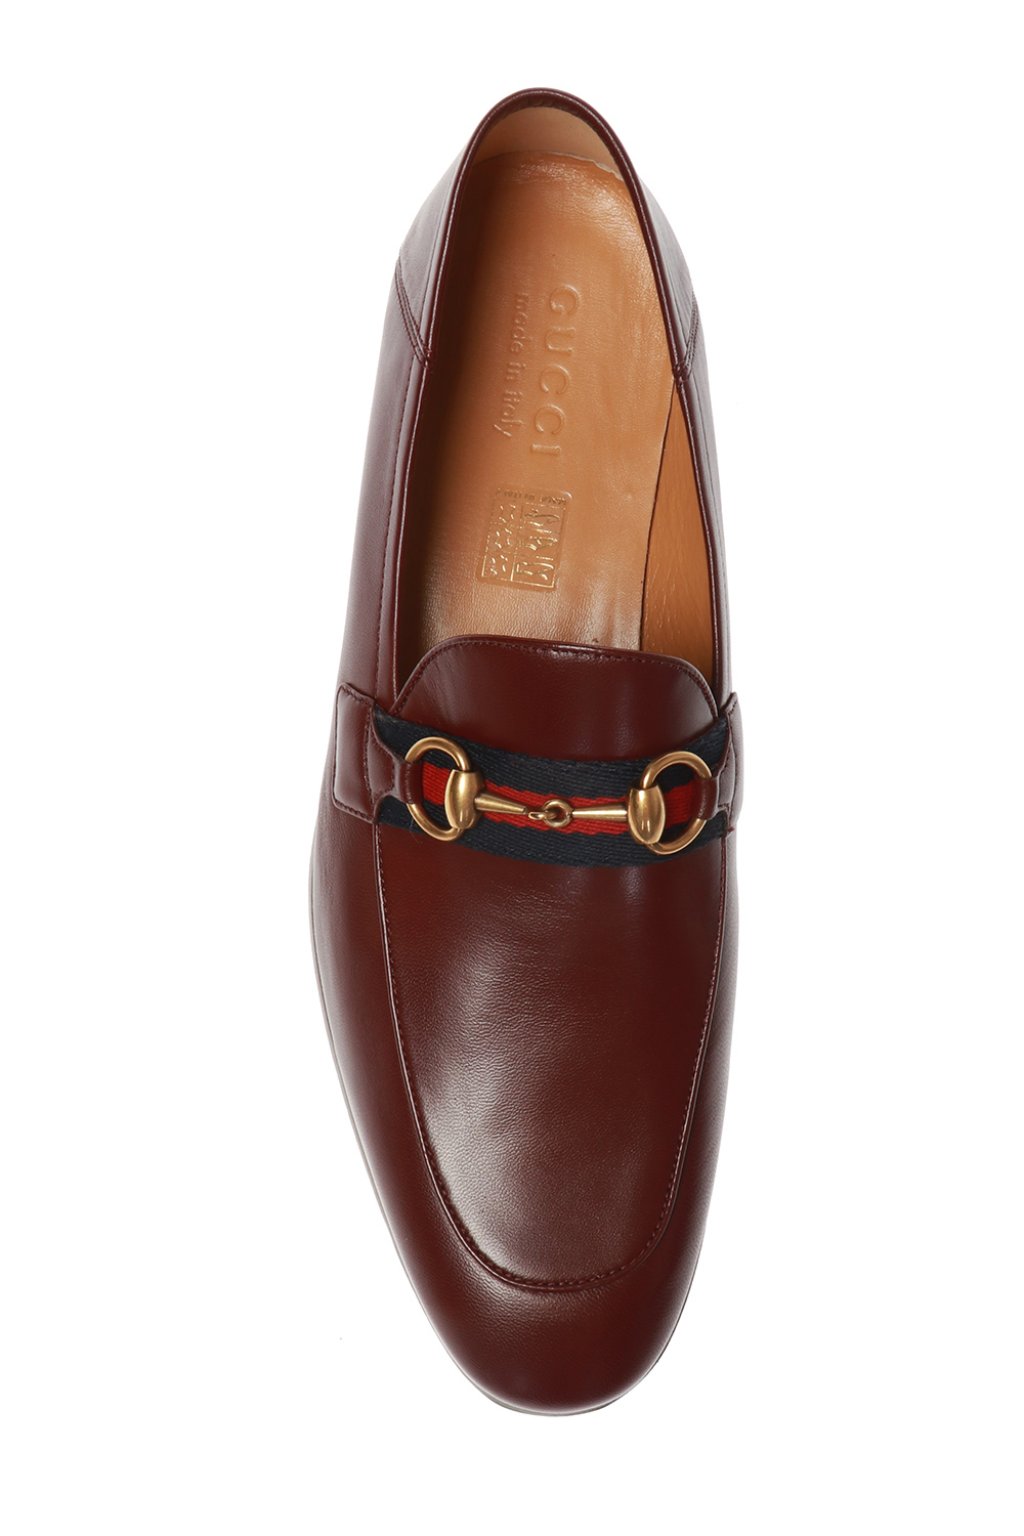 gucci fold down loafer